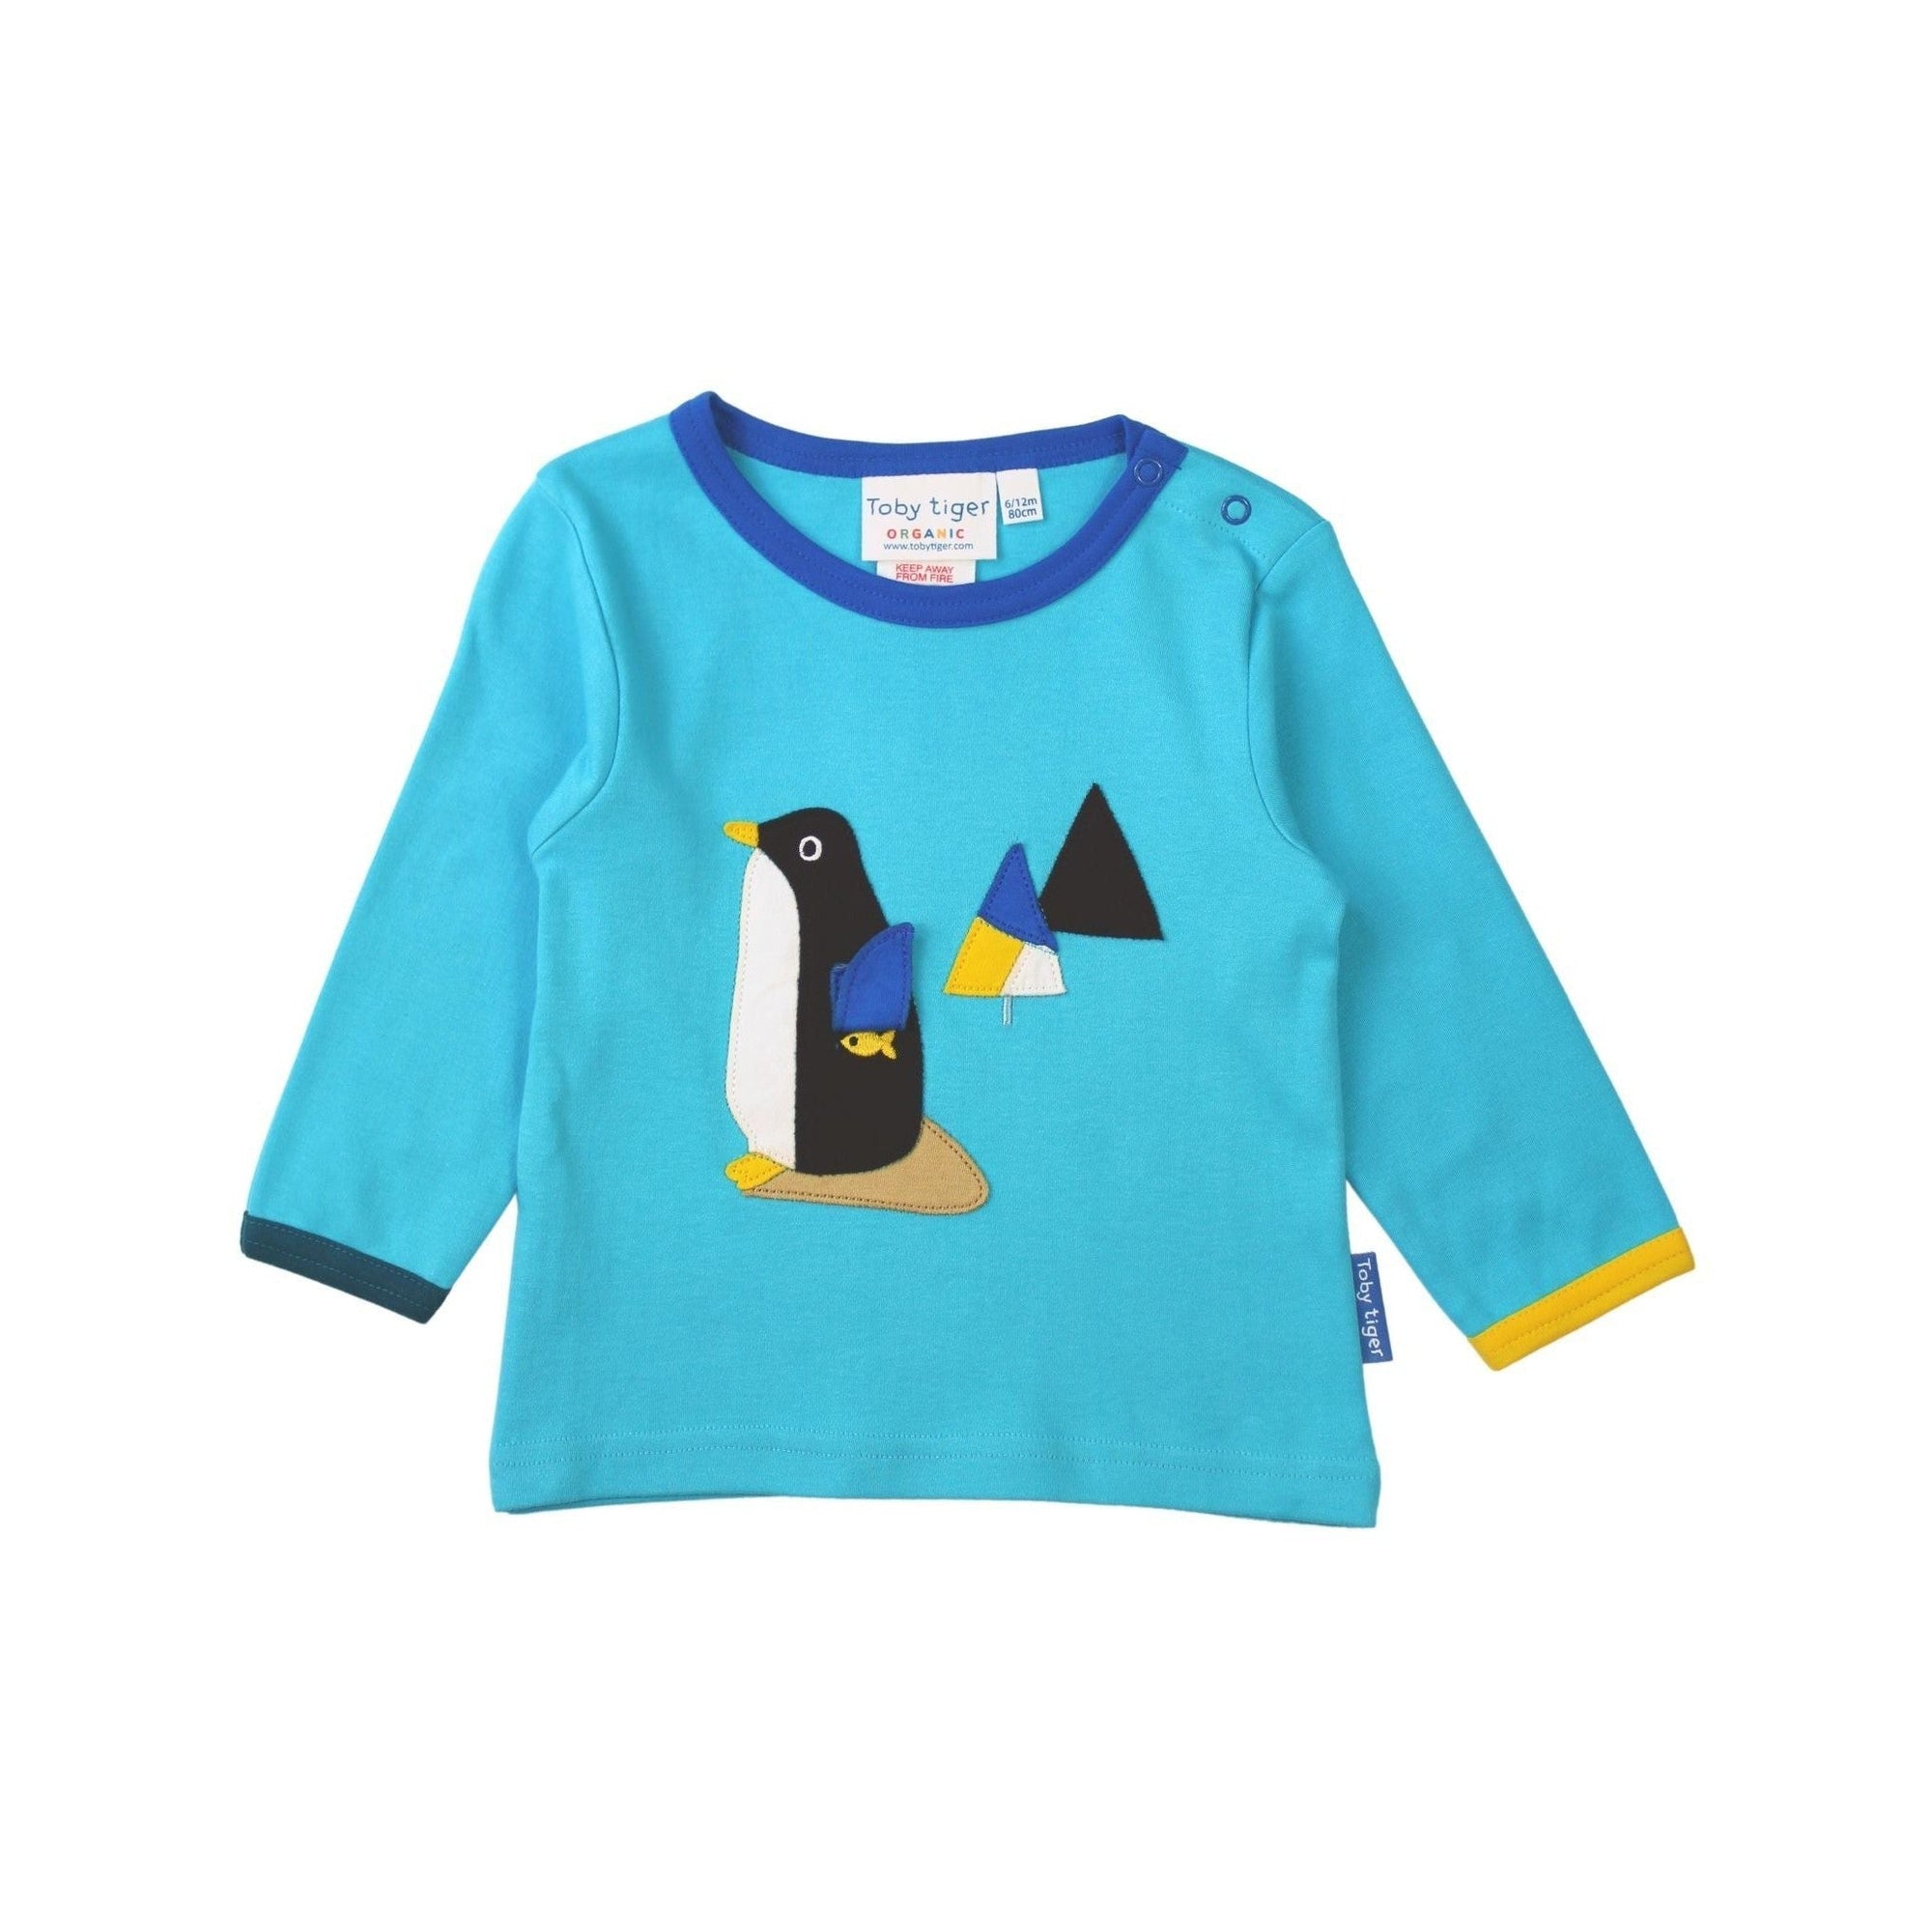 Penguin Applique Long Sleeve Shirt - 2 Left Size 6-7 & 7-8 years-Toby Tiger-Modern Rascals